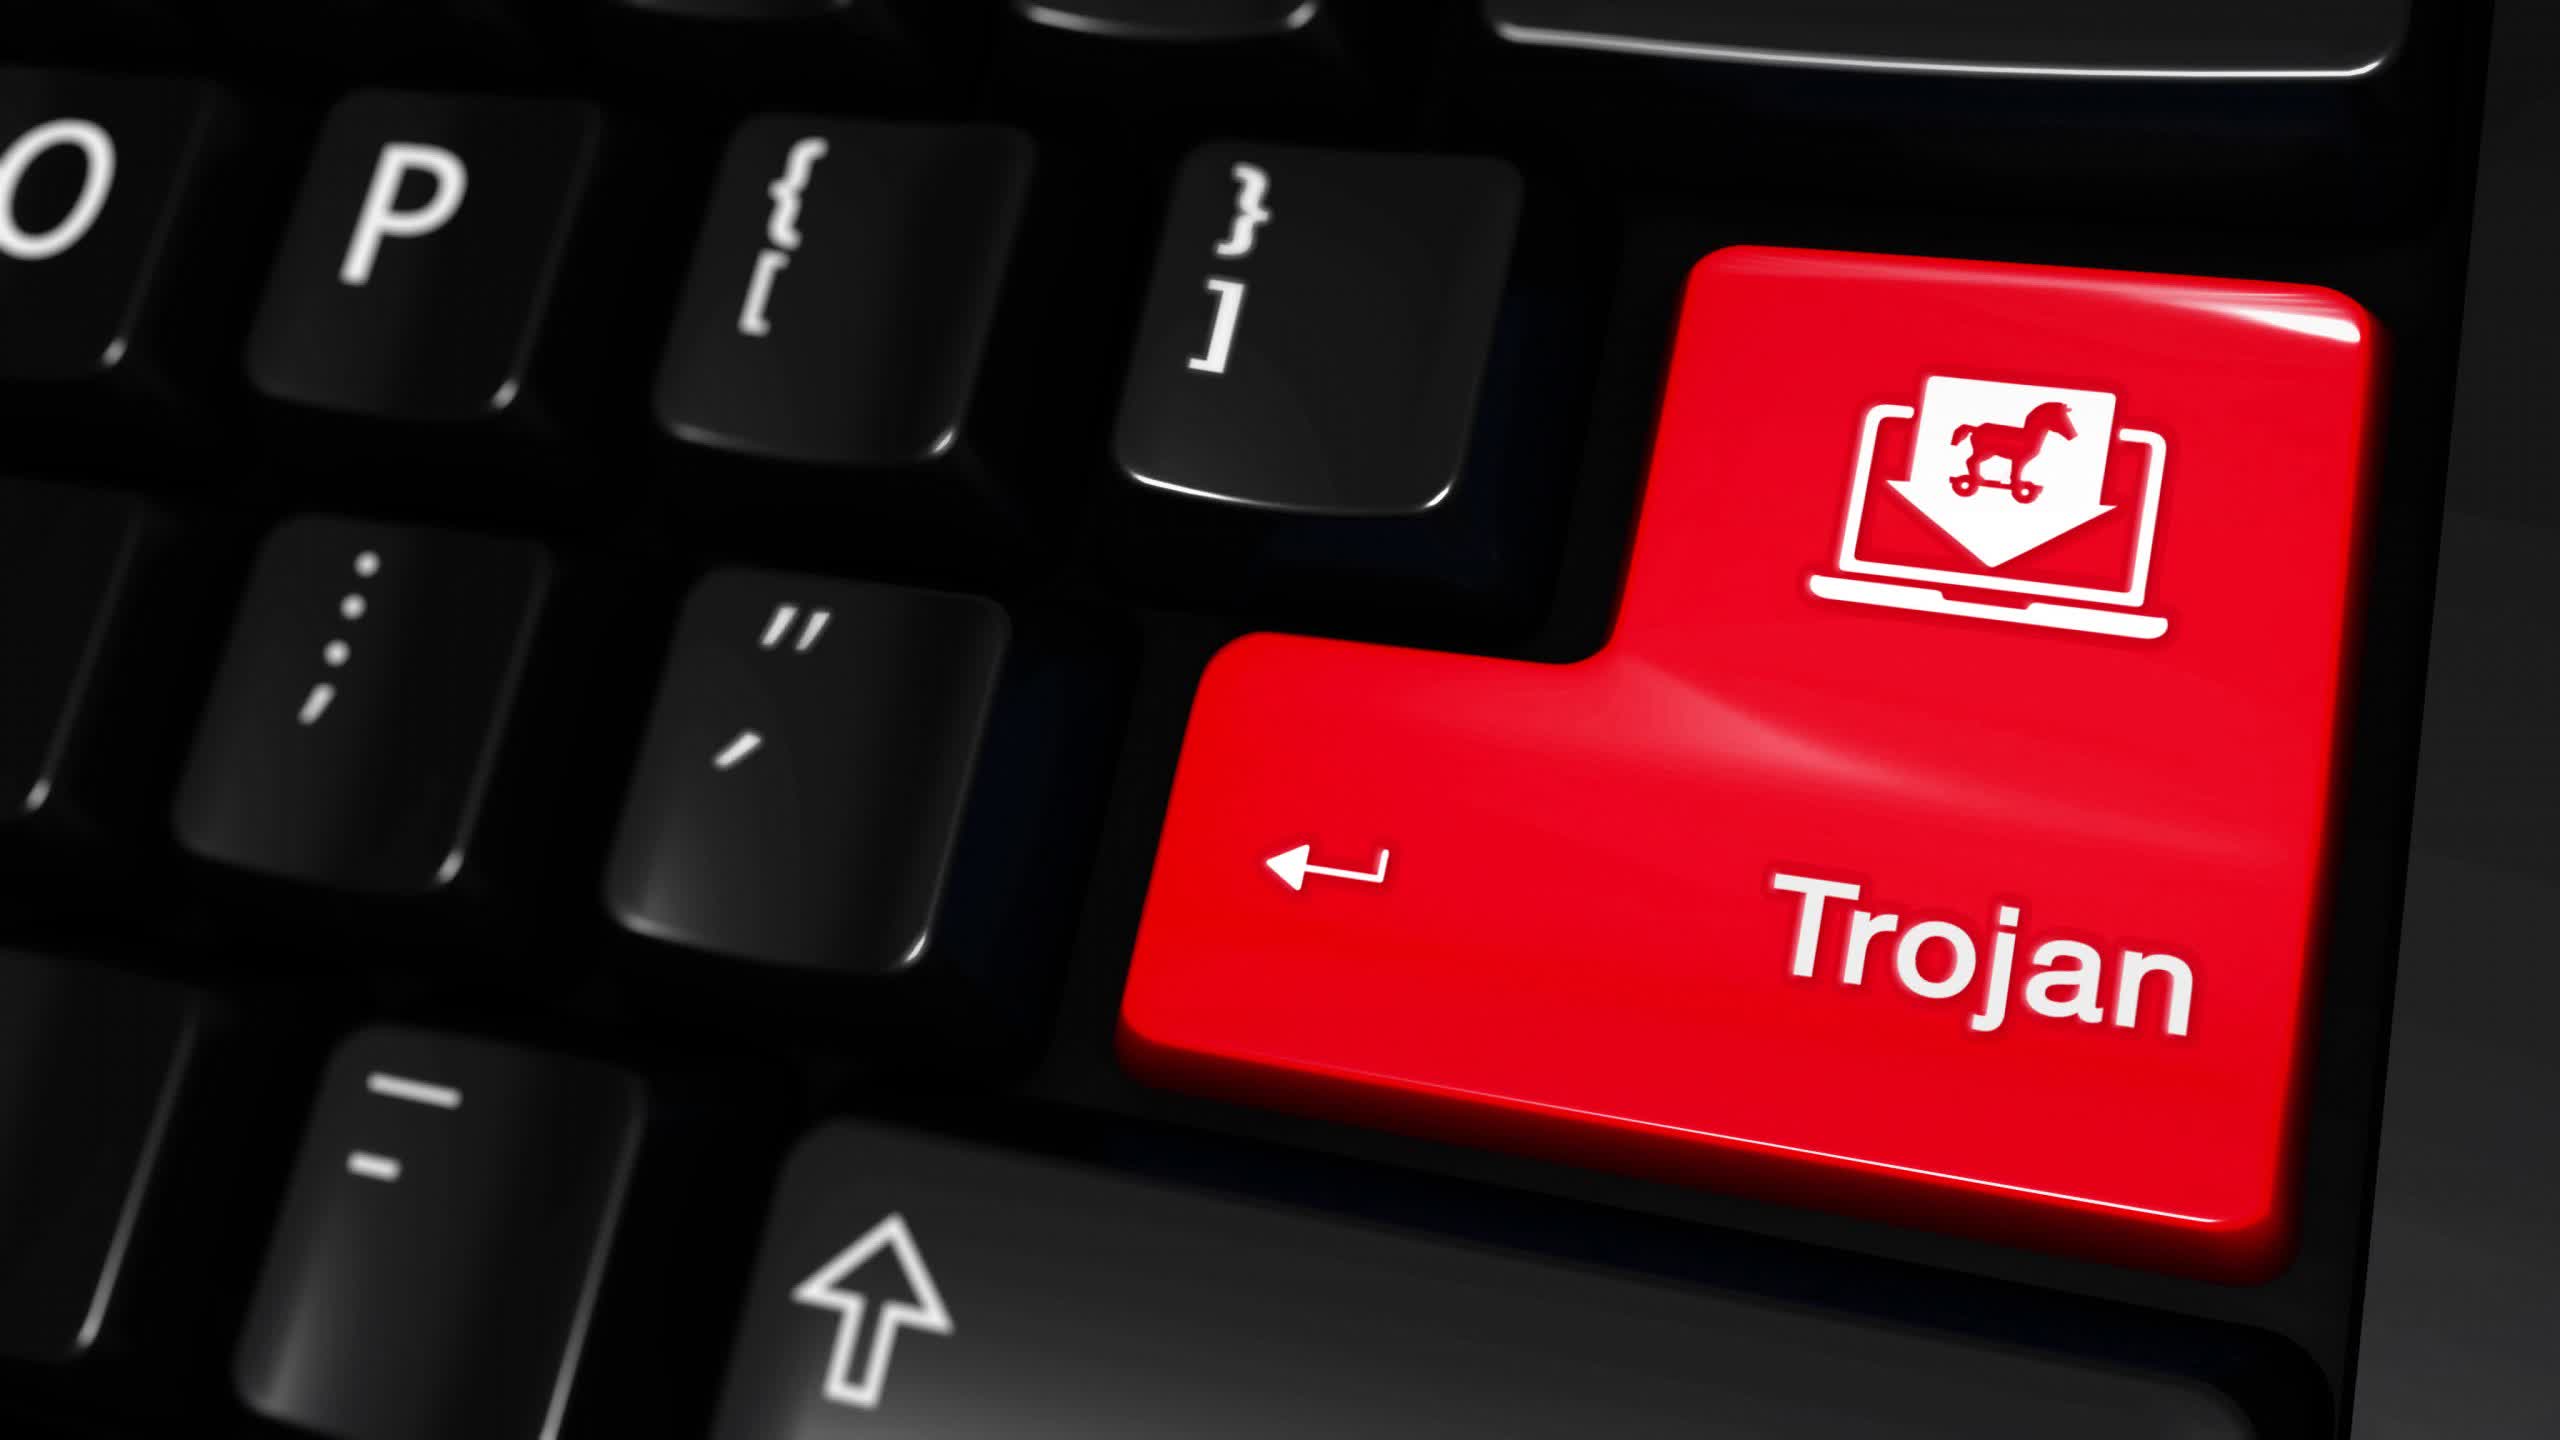 BloodyStealer 'advanced' trojan steals accounts from most major gaming platforms